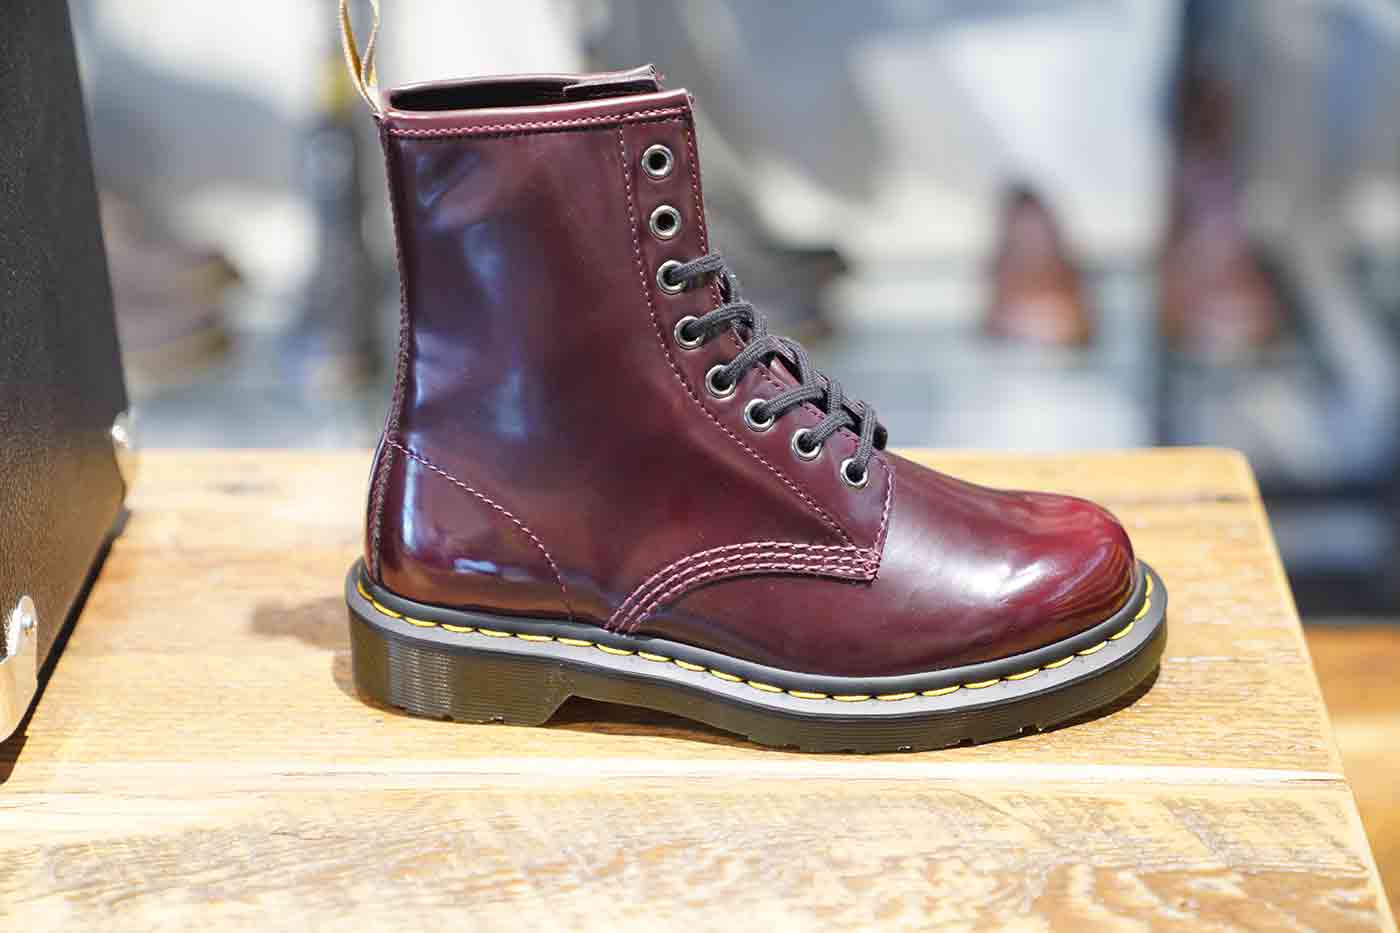 Dr. Martens 1460 vegan eight eye boots cherry red oxford rub off displayed at a company store in Los Angeles